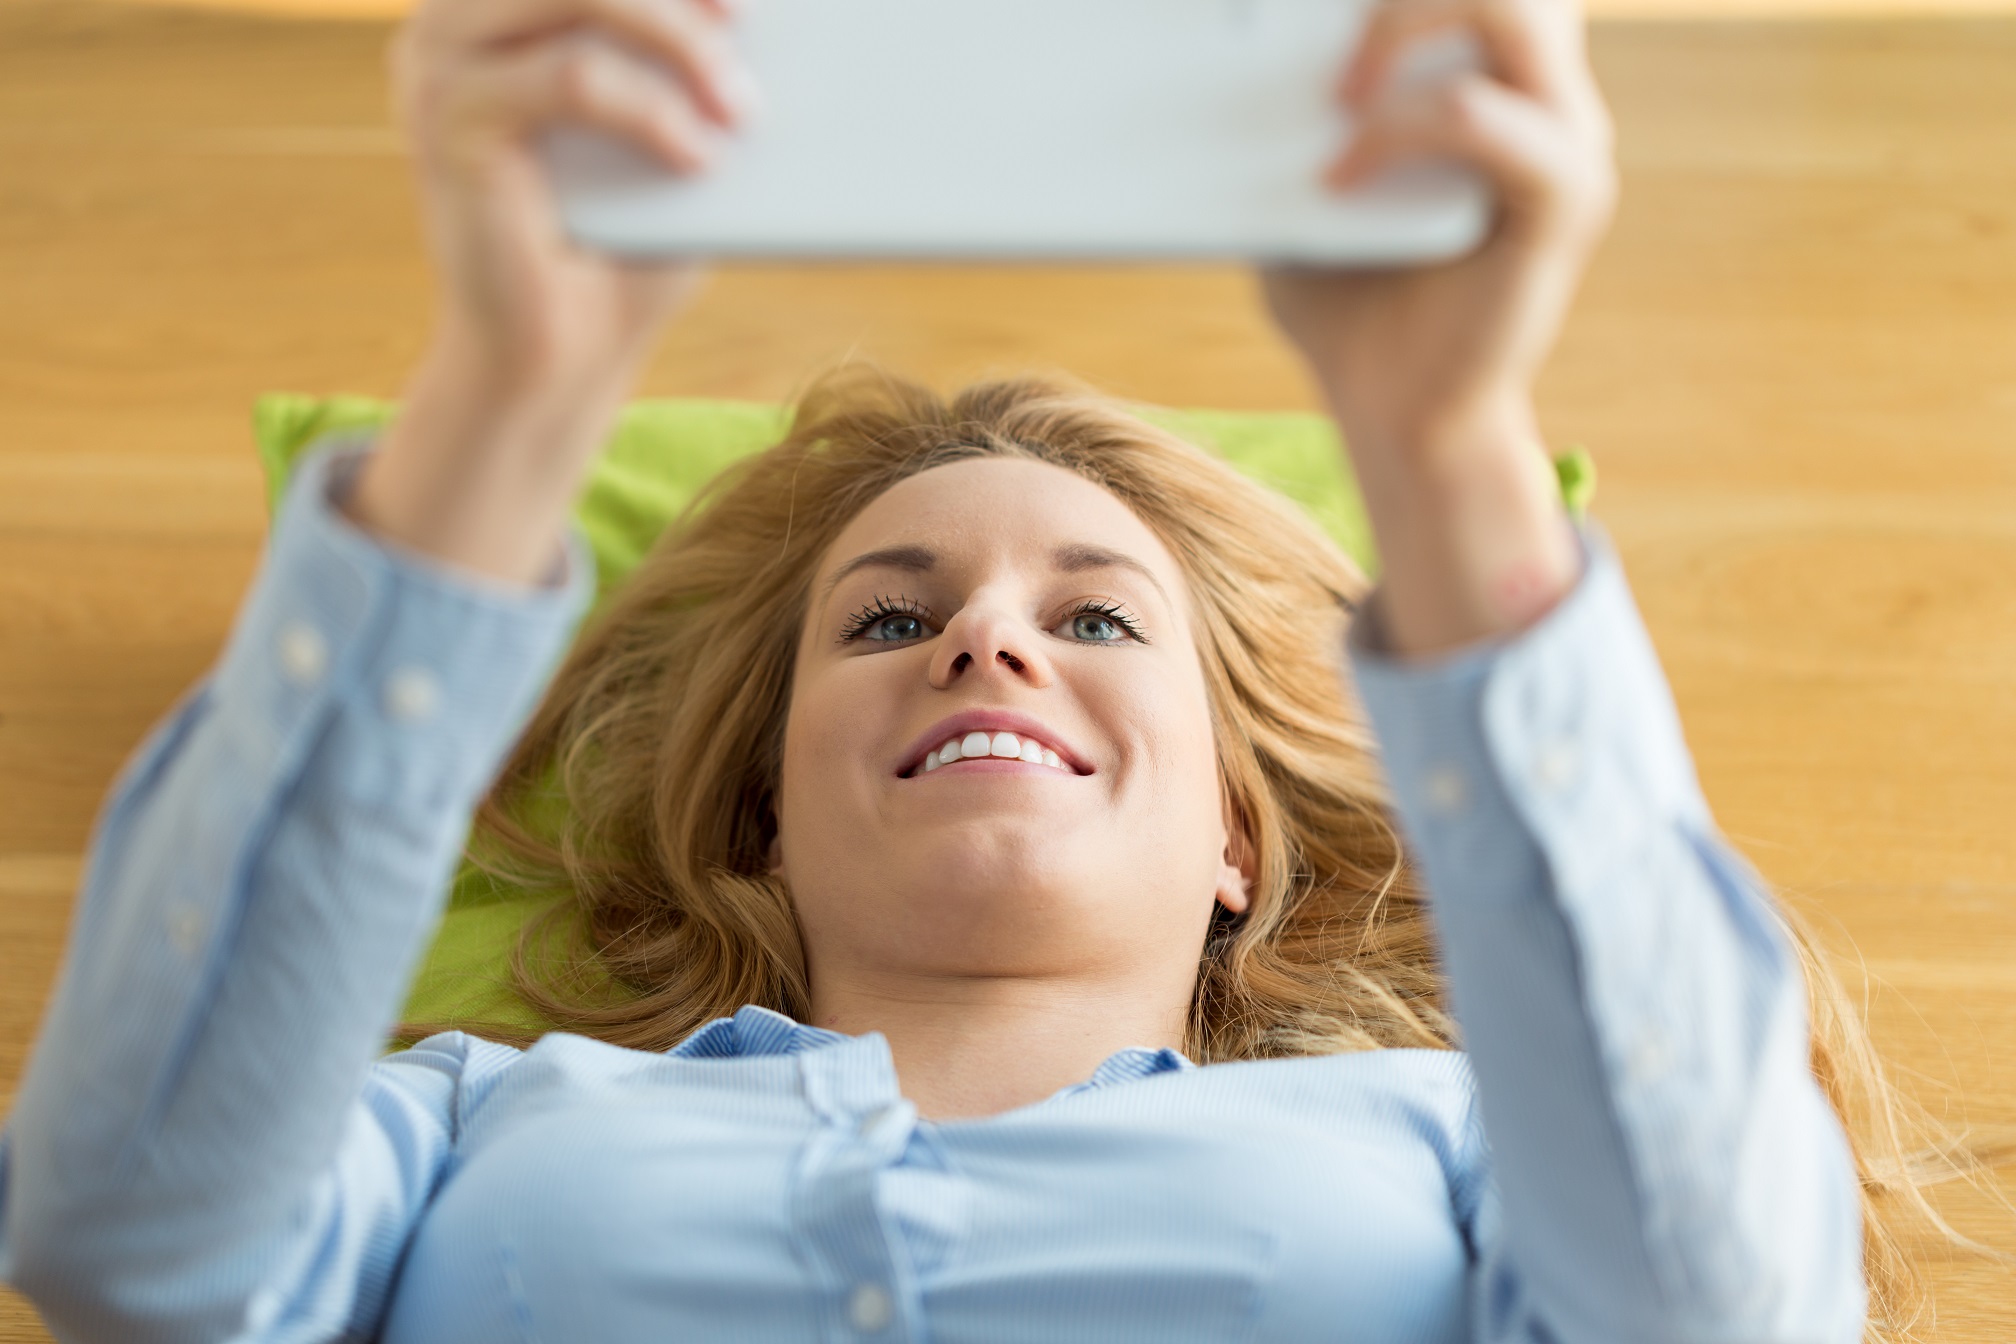 Woman using tablet in the morning, horizontal